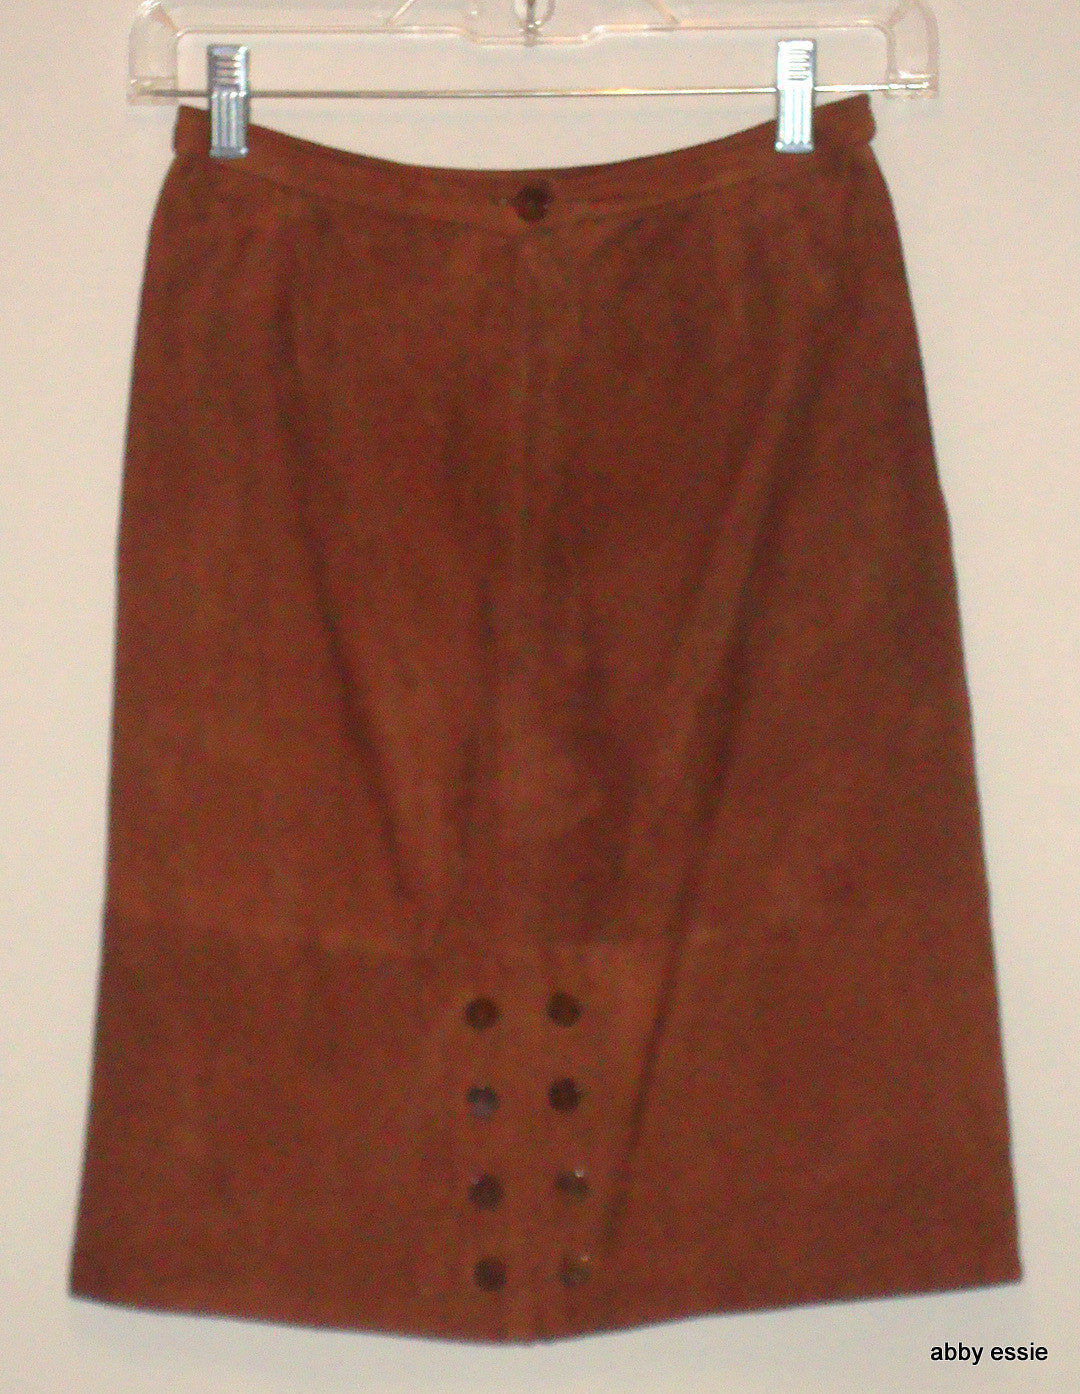 Vintage Valentino Made In Italy Brown Suede Leather Skirt Abby Essie